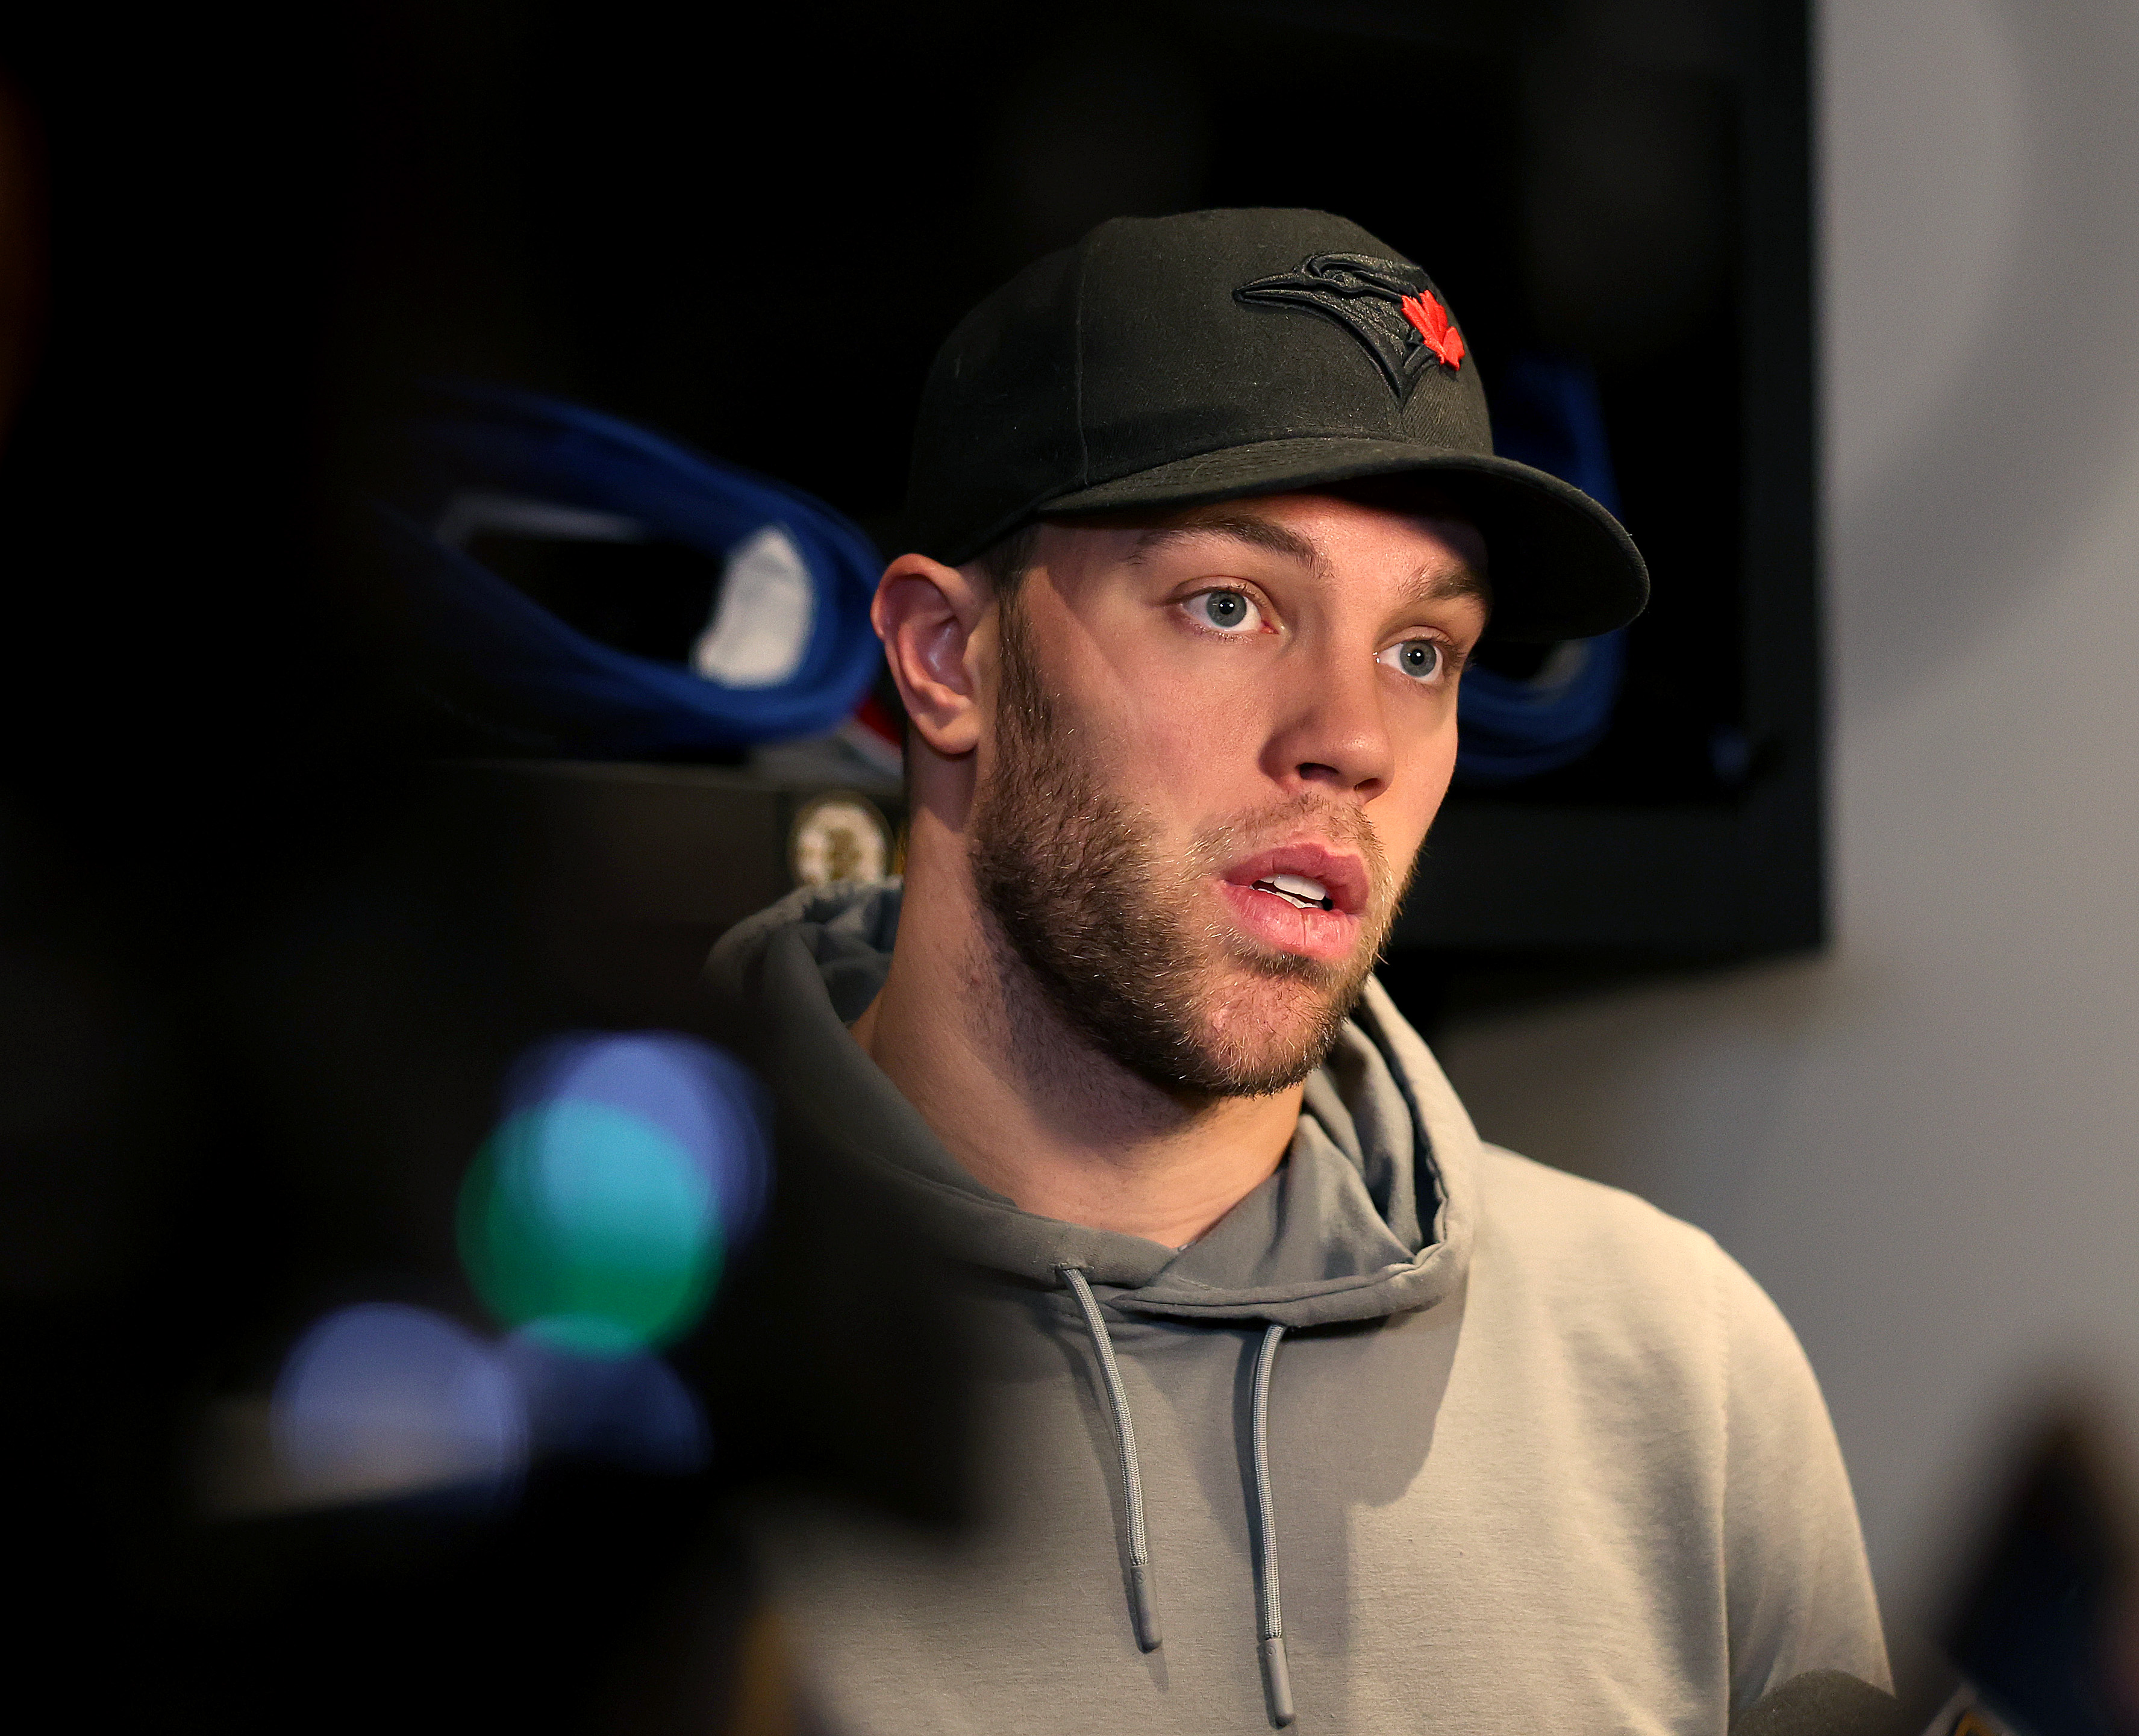 Bruins trade Taylor Hall to Blackhawks for salary cap relief - CBS Boston